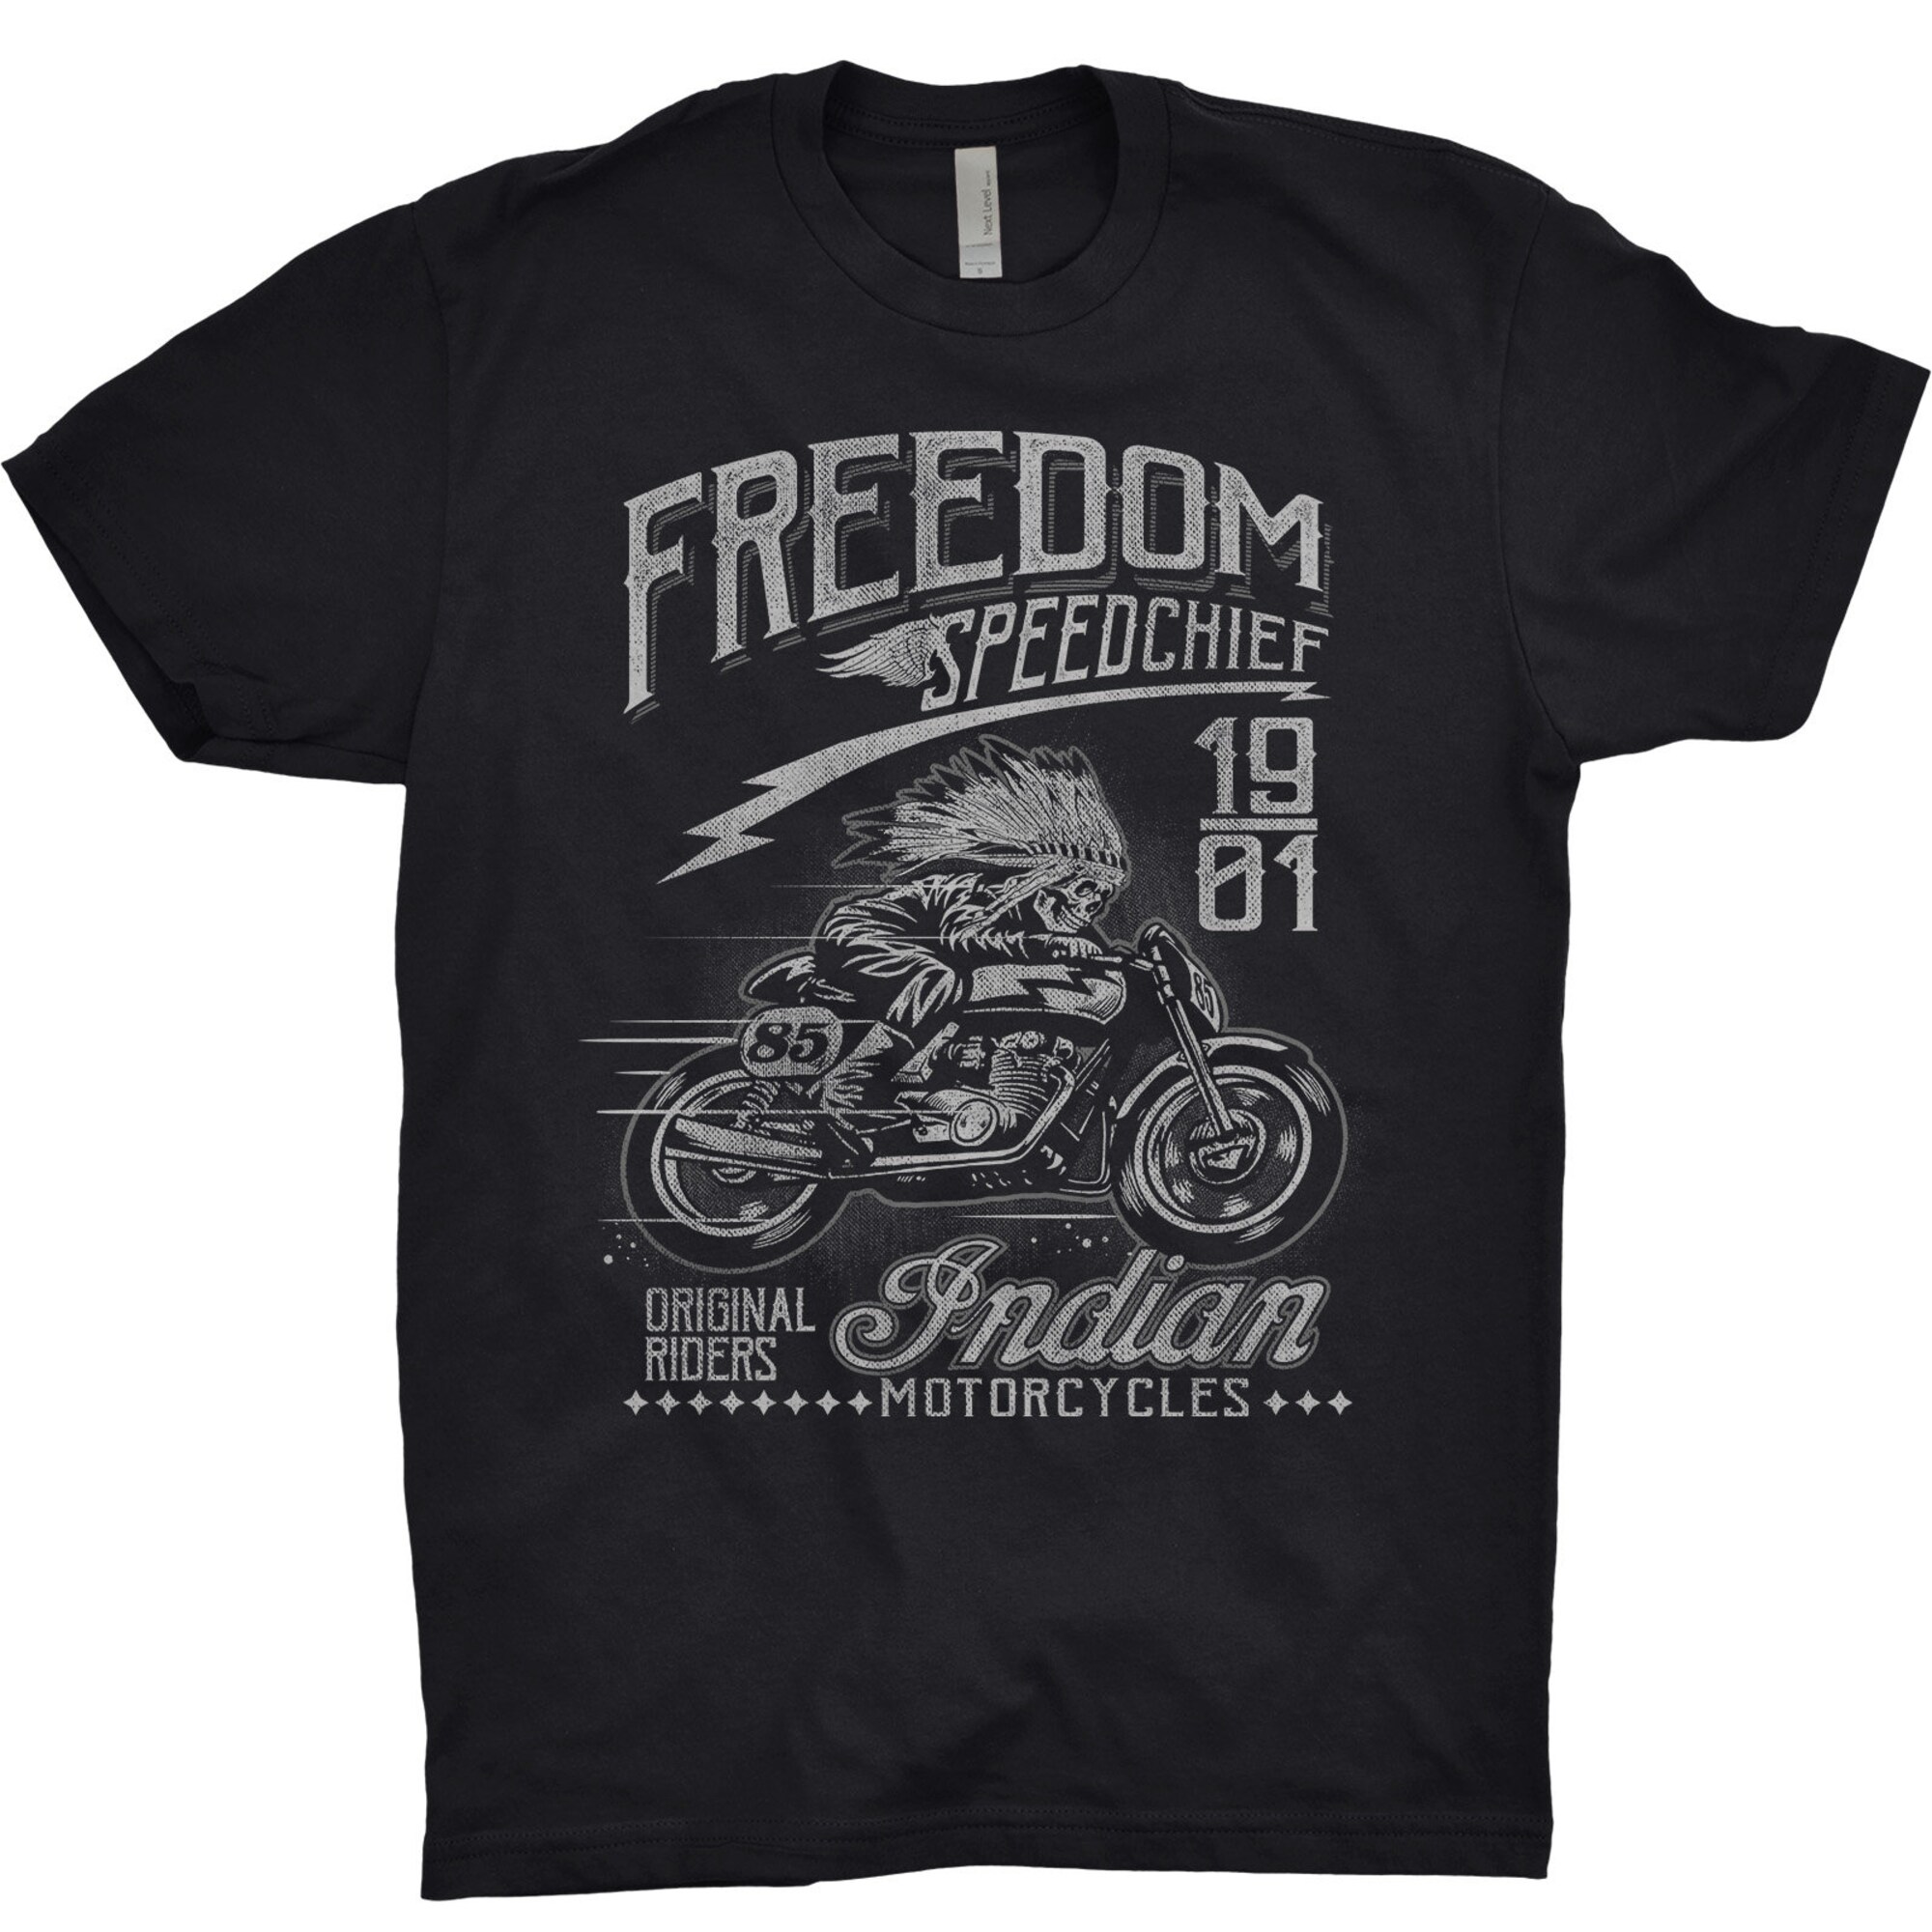 Discover Freedom Speed Chief T-shirt Motorcycle Motorbike